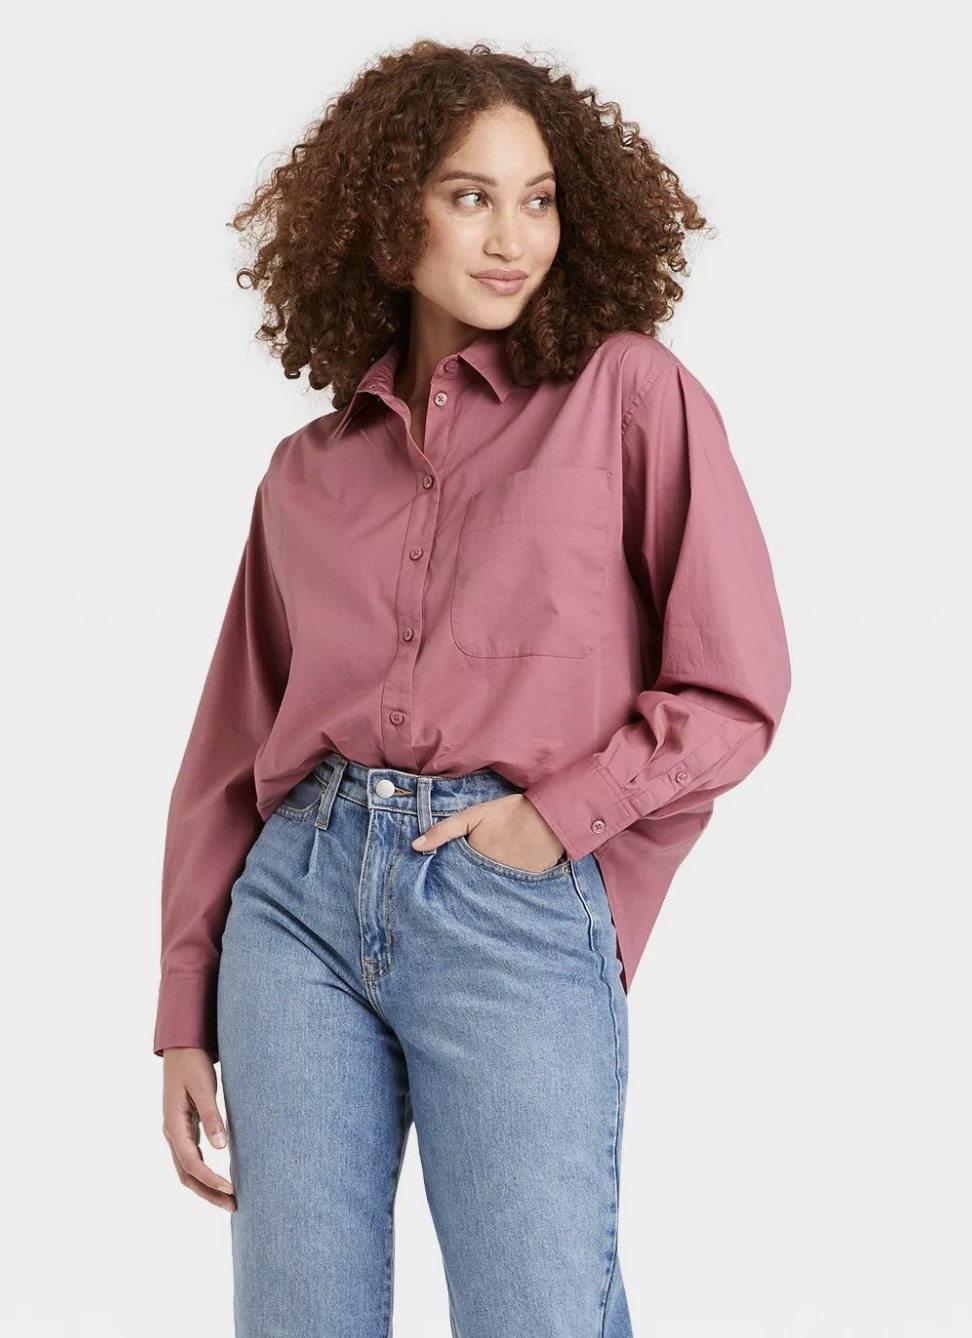 An adult is wearing a rosey purple oversized button-up shirt tucked into jeans